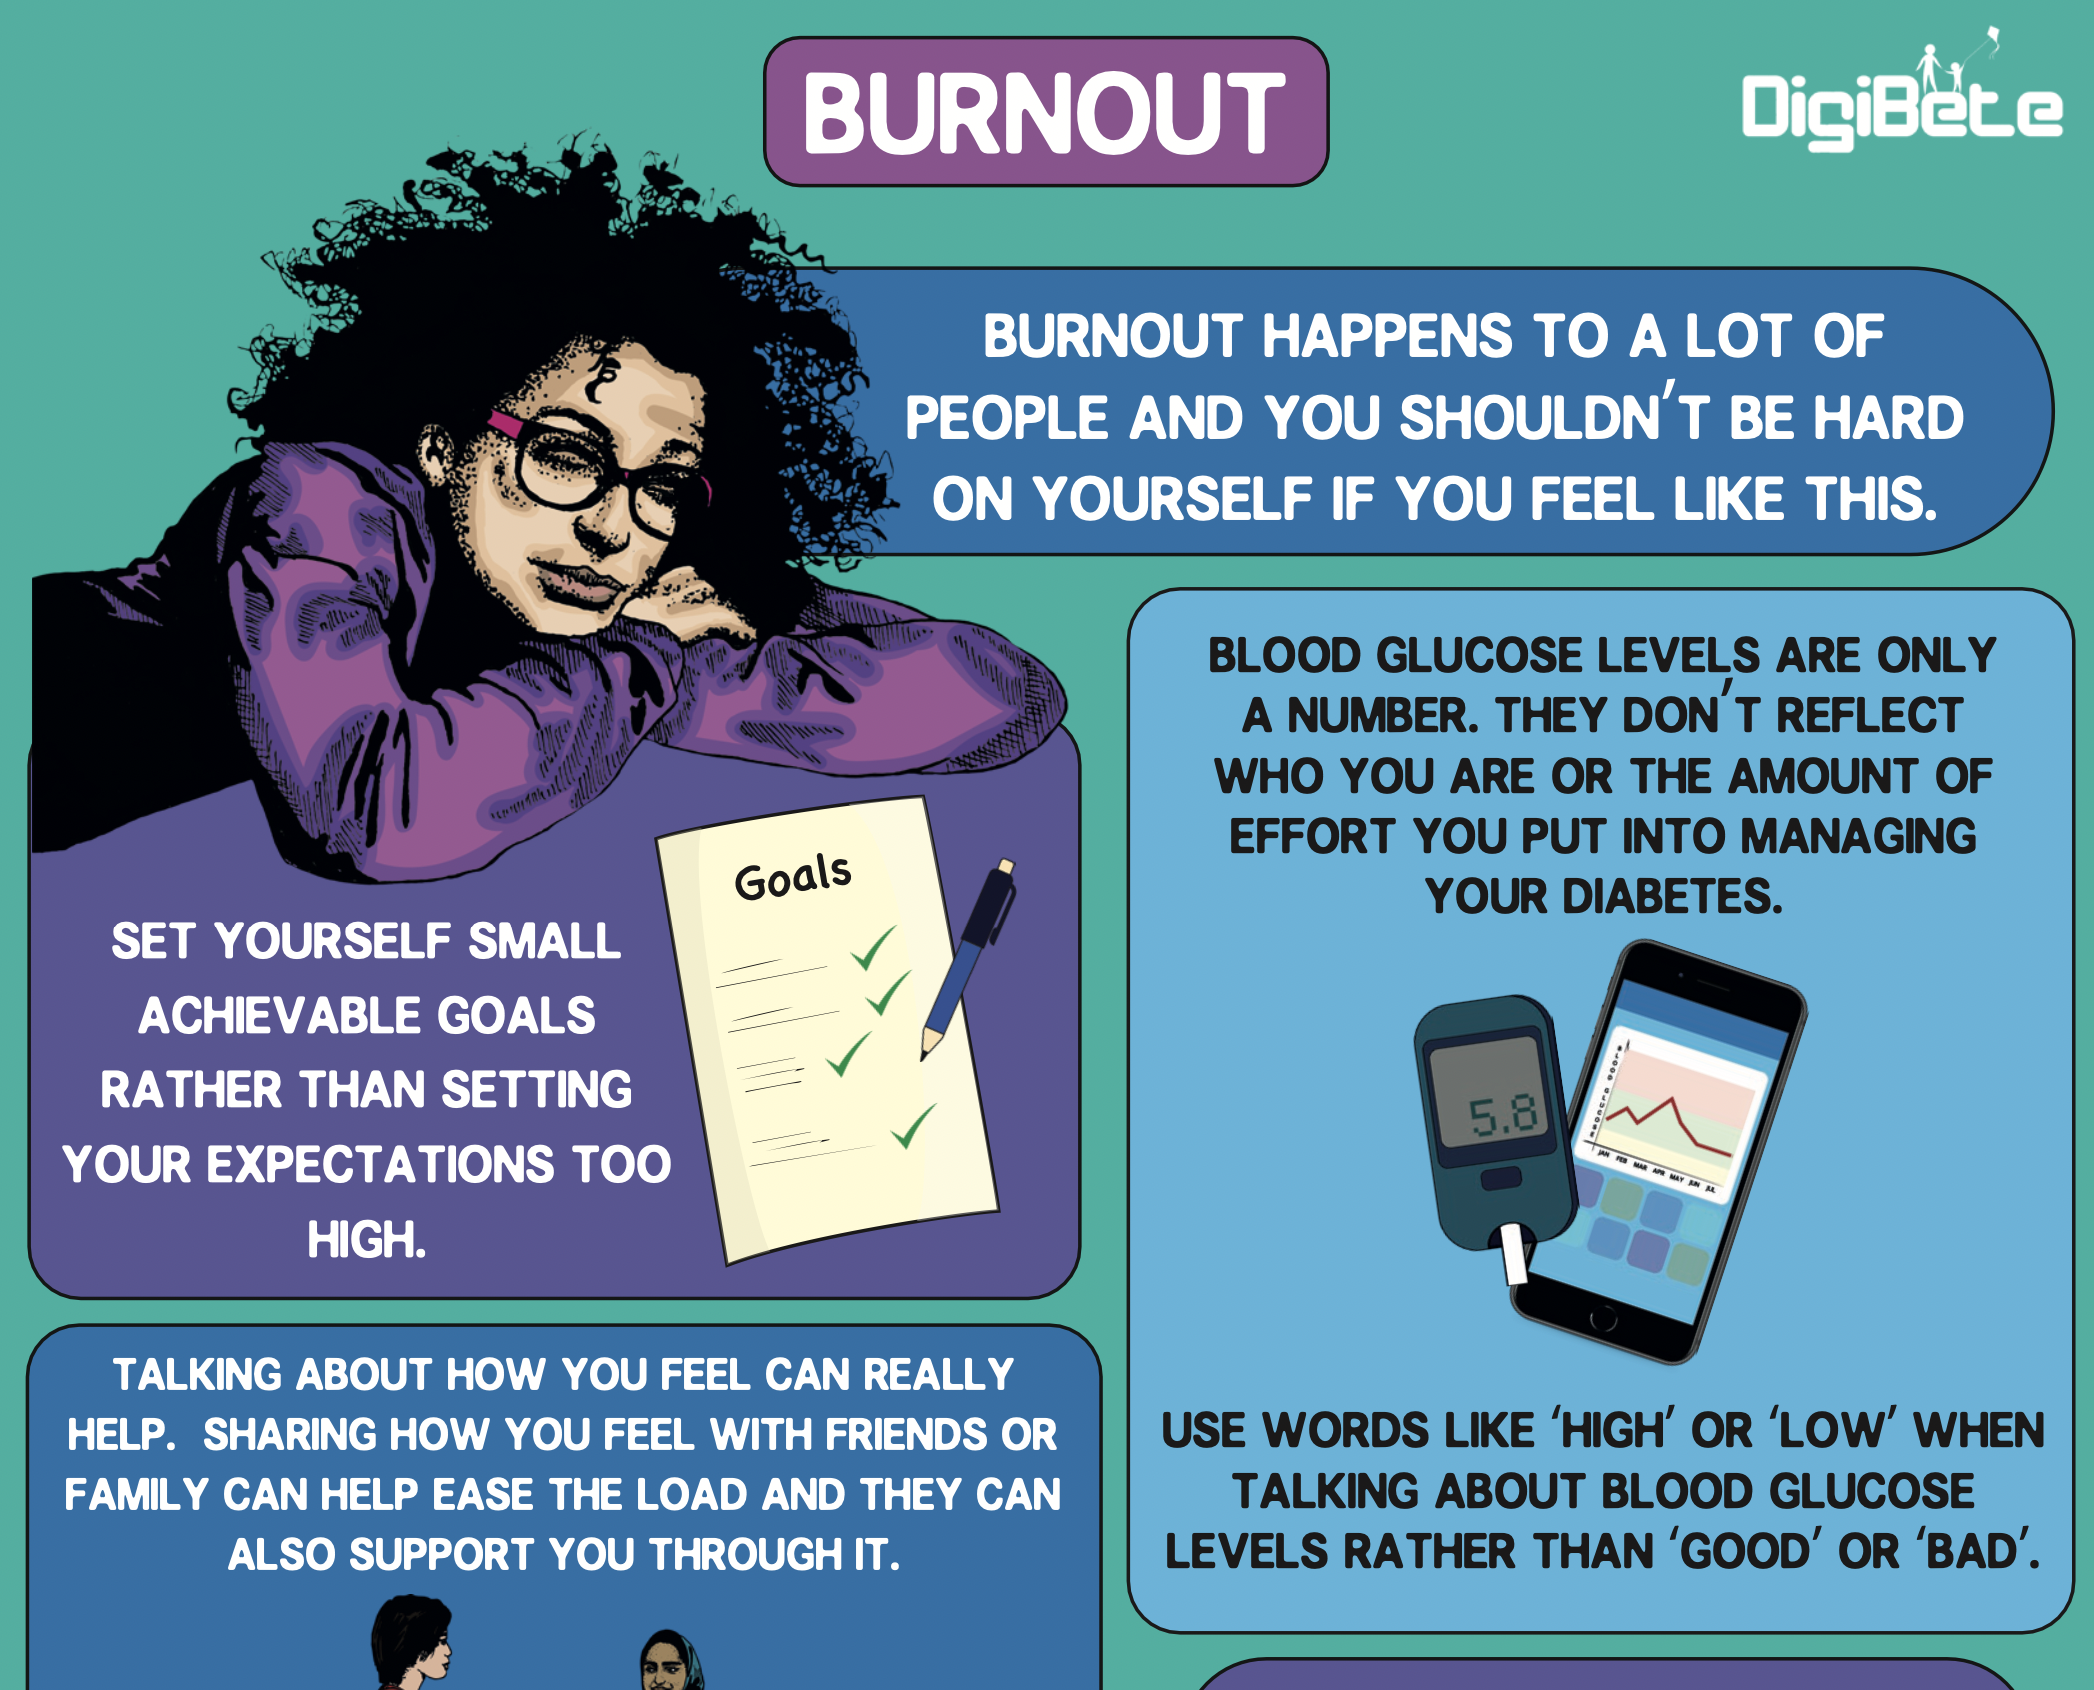 New Burnout Resource on DigiBete